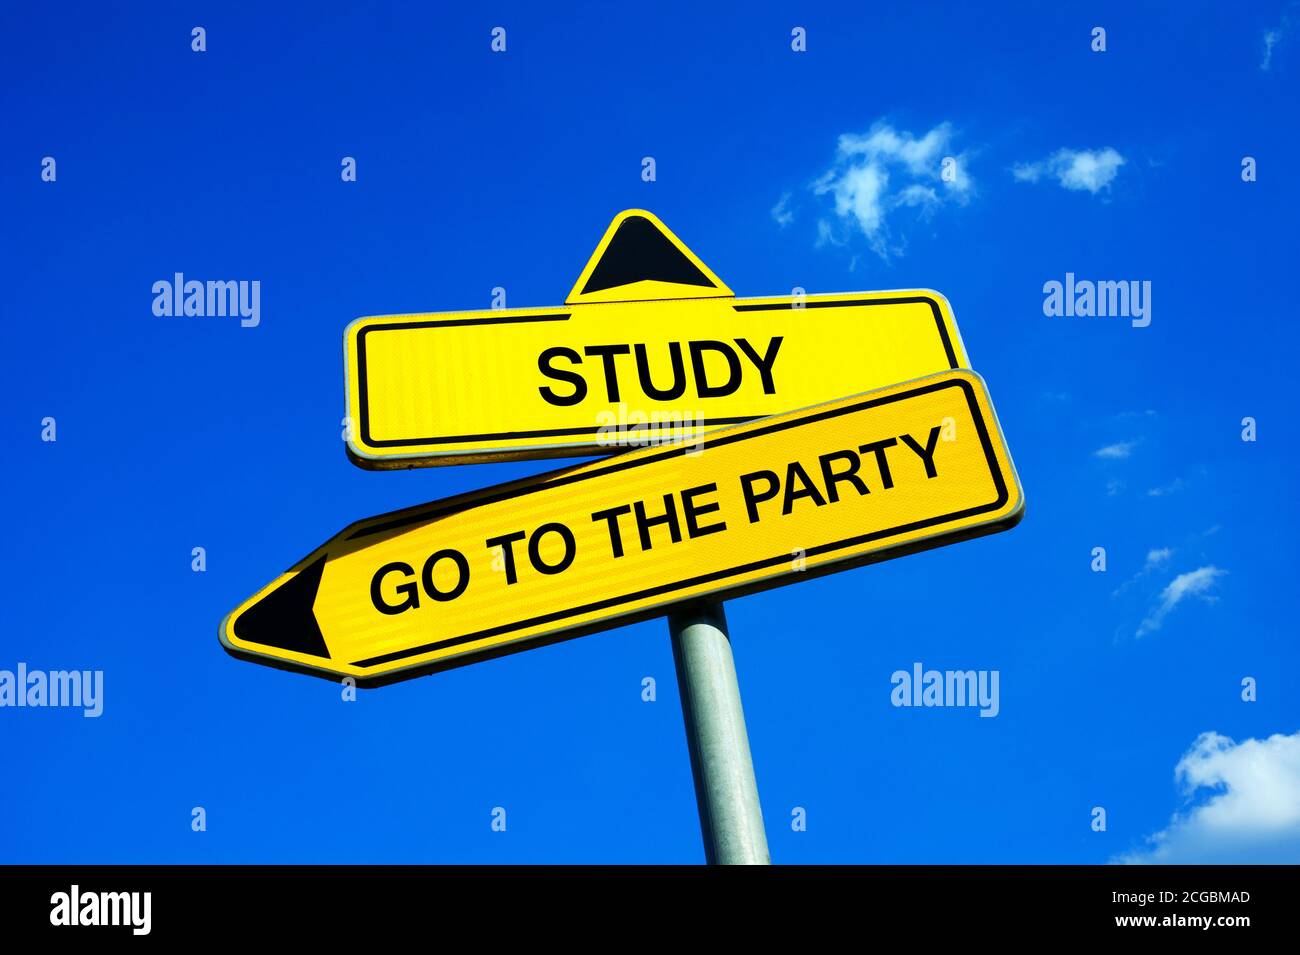 Study vs Go To The Party - Traffic sign with two options - learning for exams at school / university or enjoy fun of student life. Diligence and studi Stock Photo